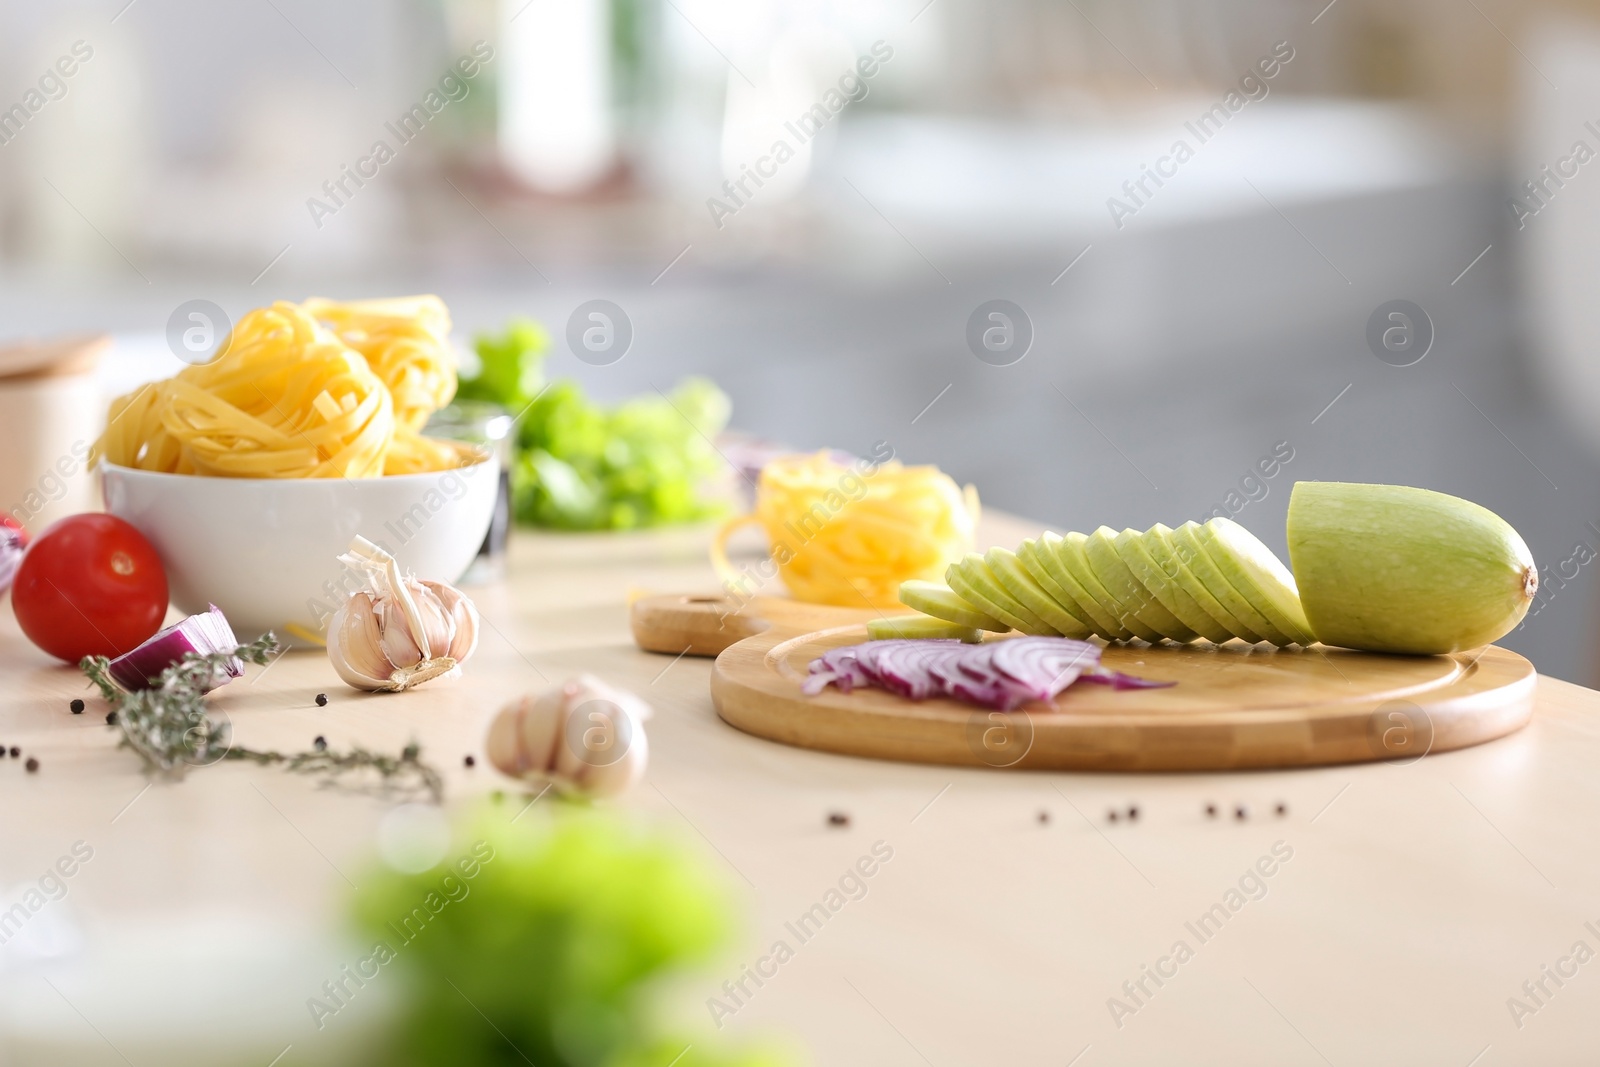 Photo of Fresh products and cutting board on kitchen table. Cooking healthy food